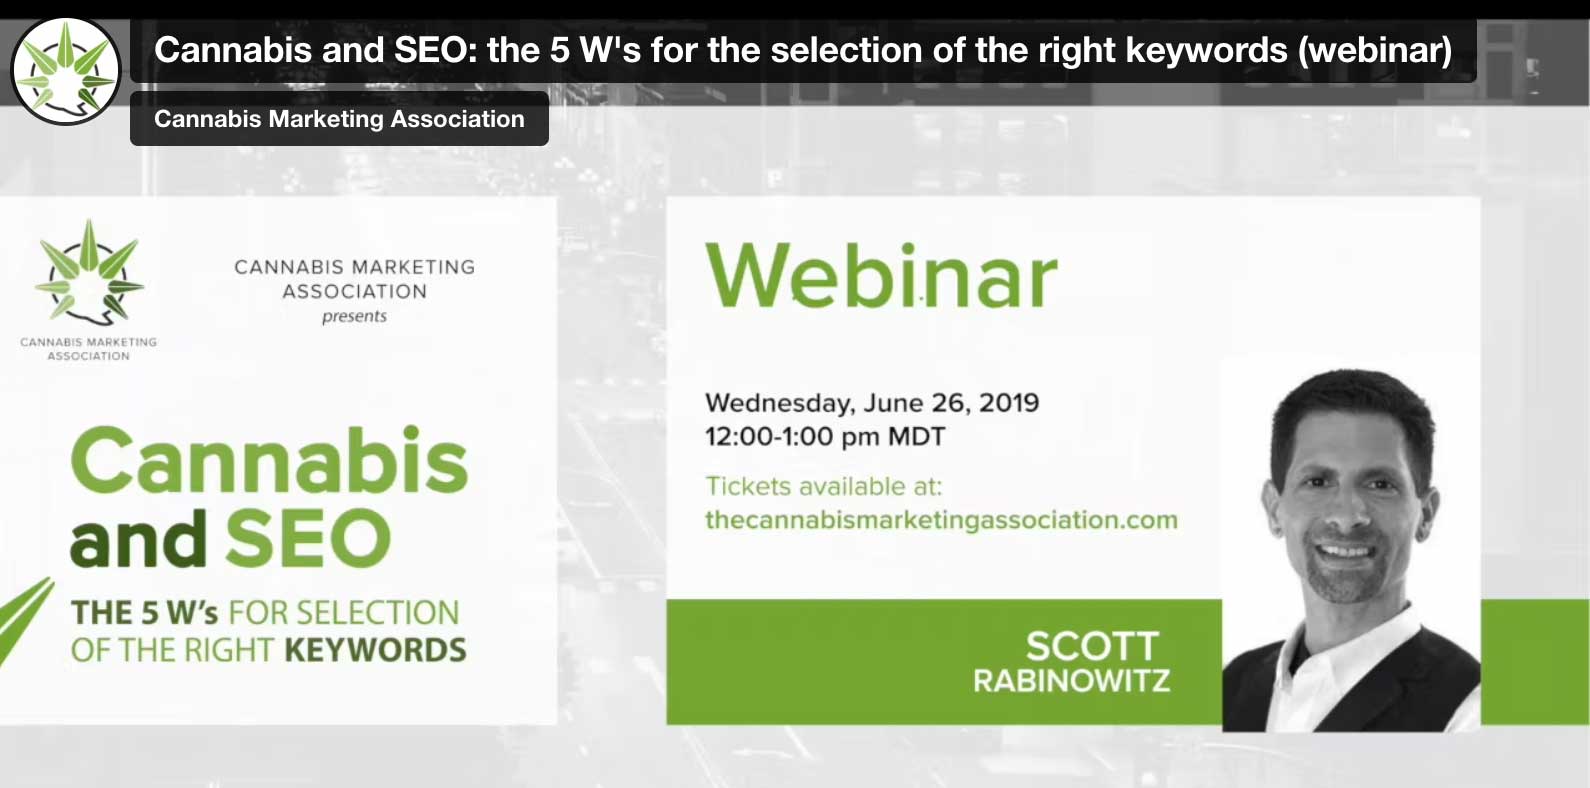 CMA: Cannabis and SEO: The 5 W’s for Selection of the Right Keywords